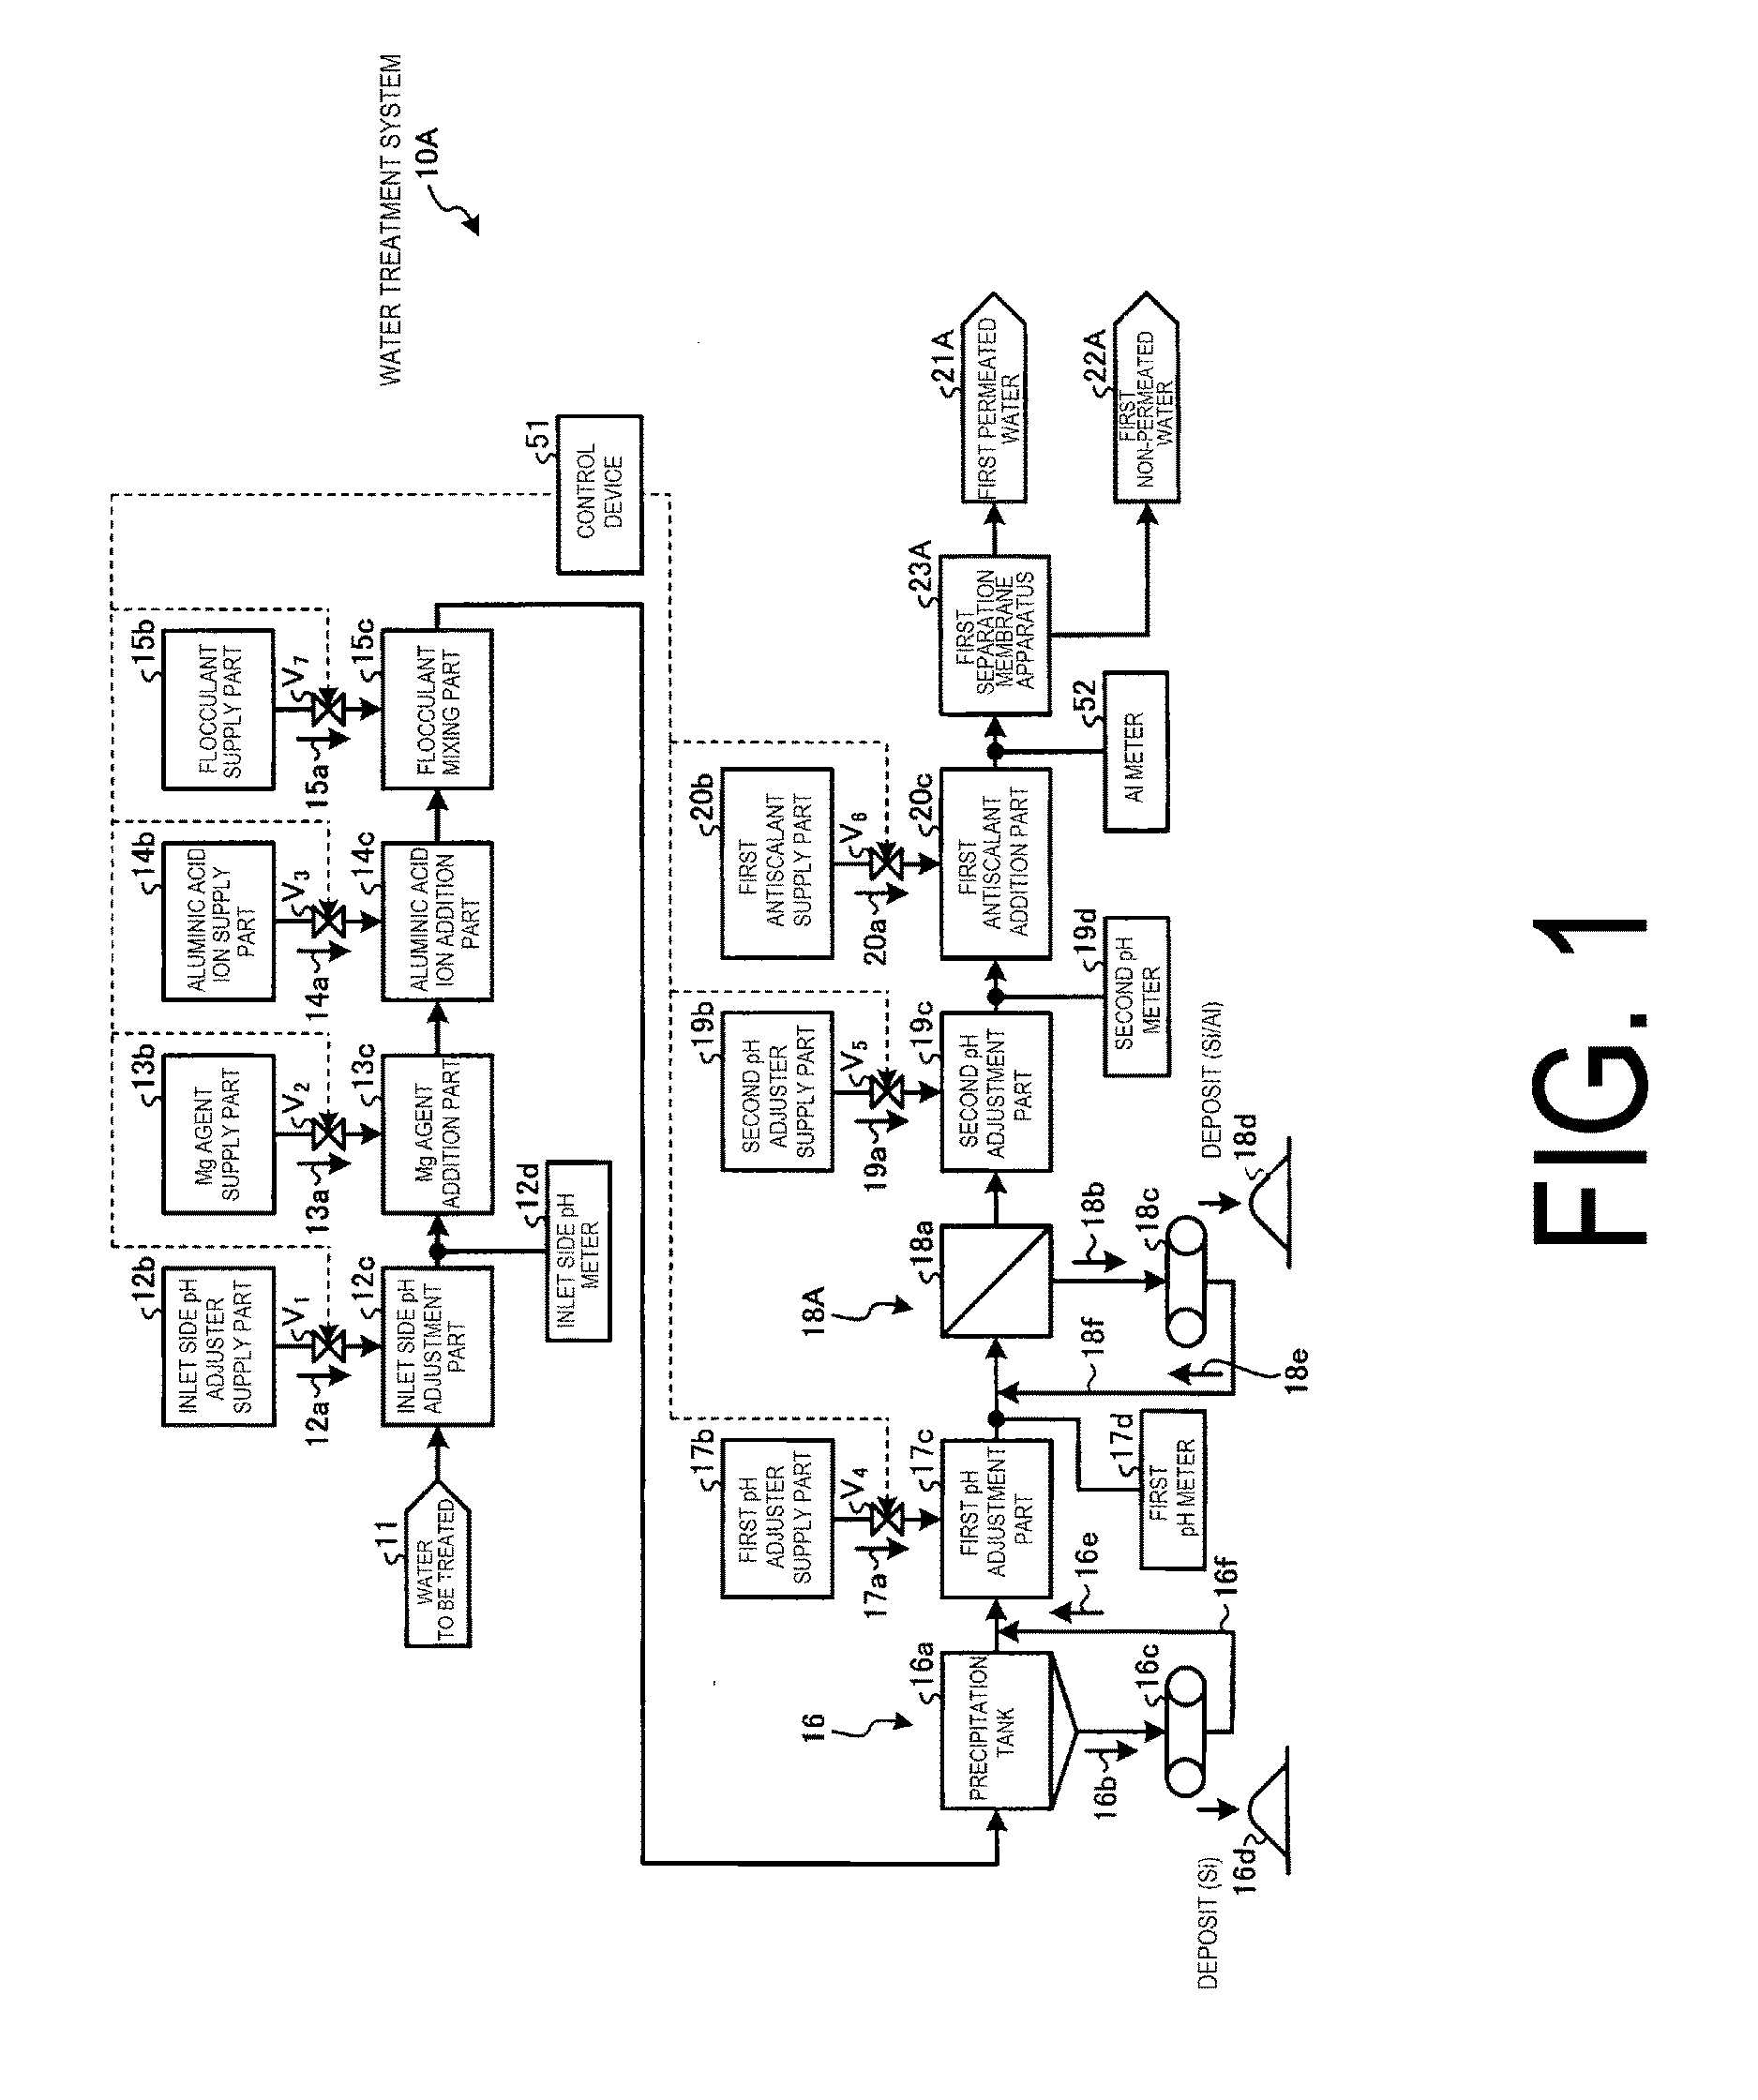 Water treatment system and power generation facility